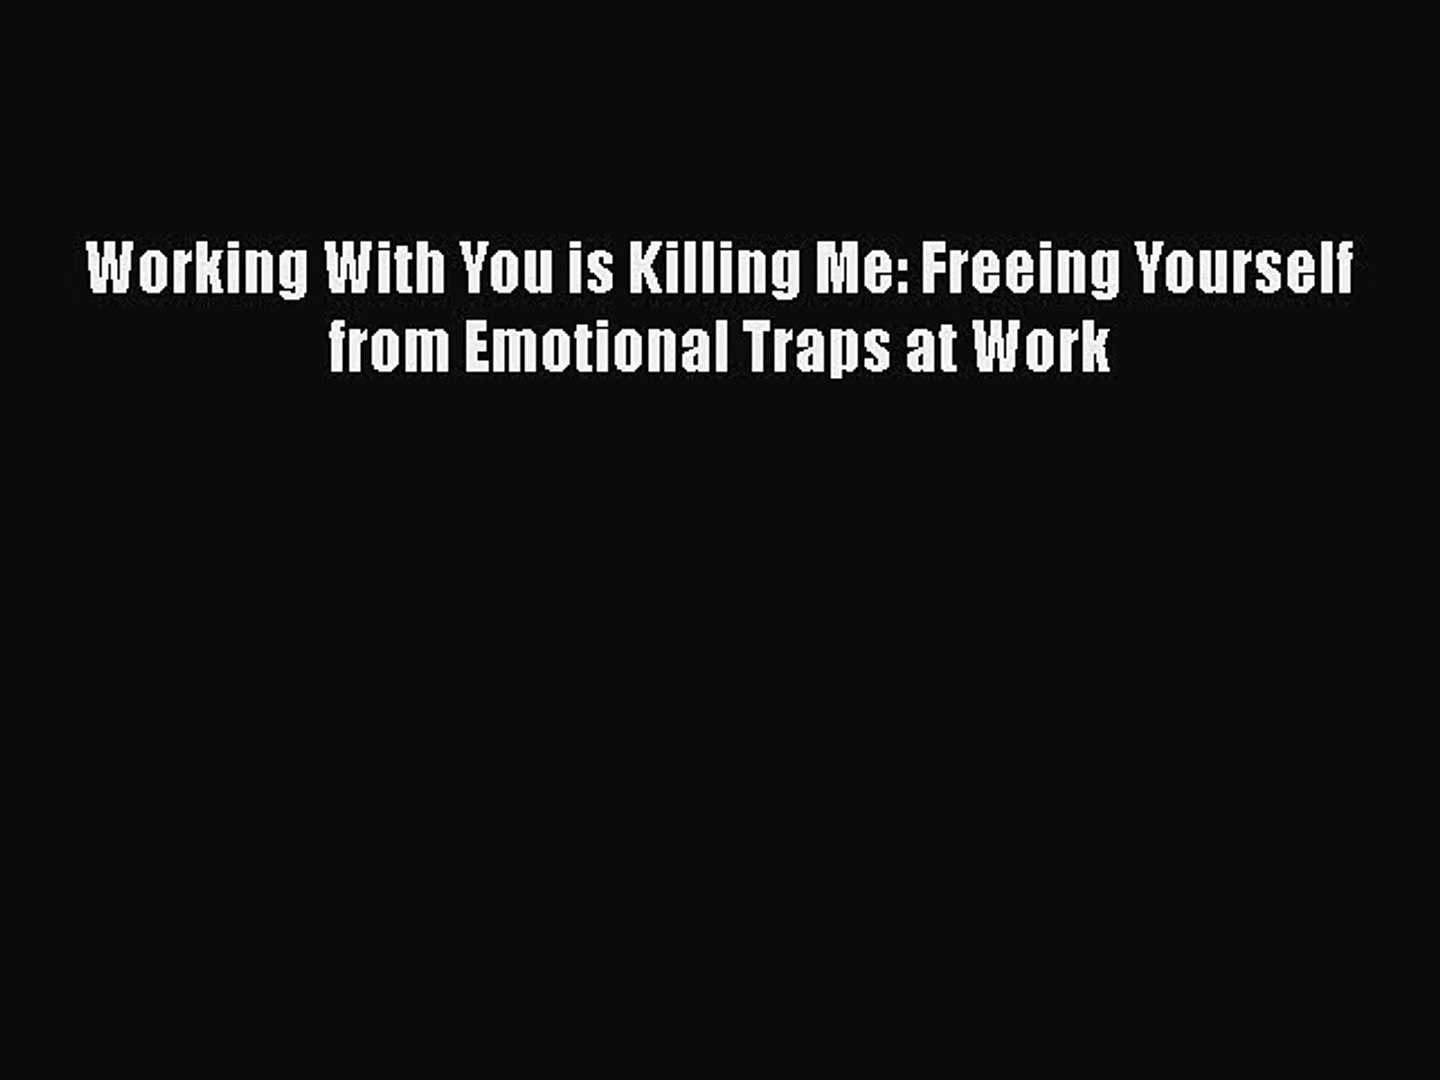 Katherine Crowley - Working With You is Killing Me: Freeing Yourself from Emotional Tras at Work